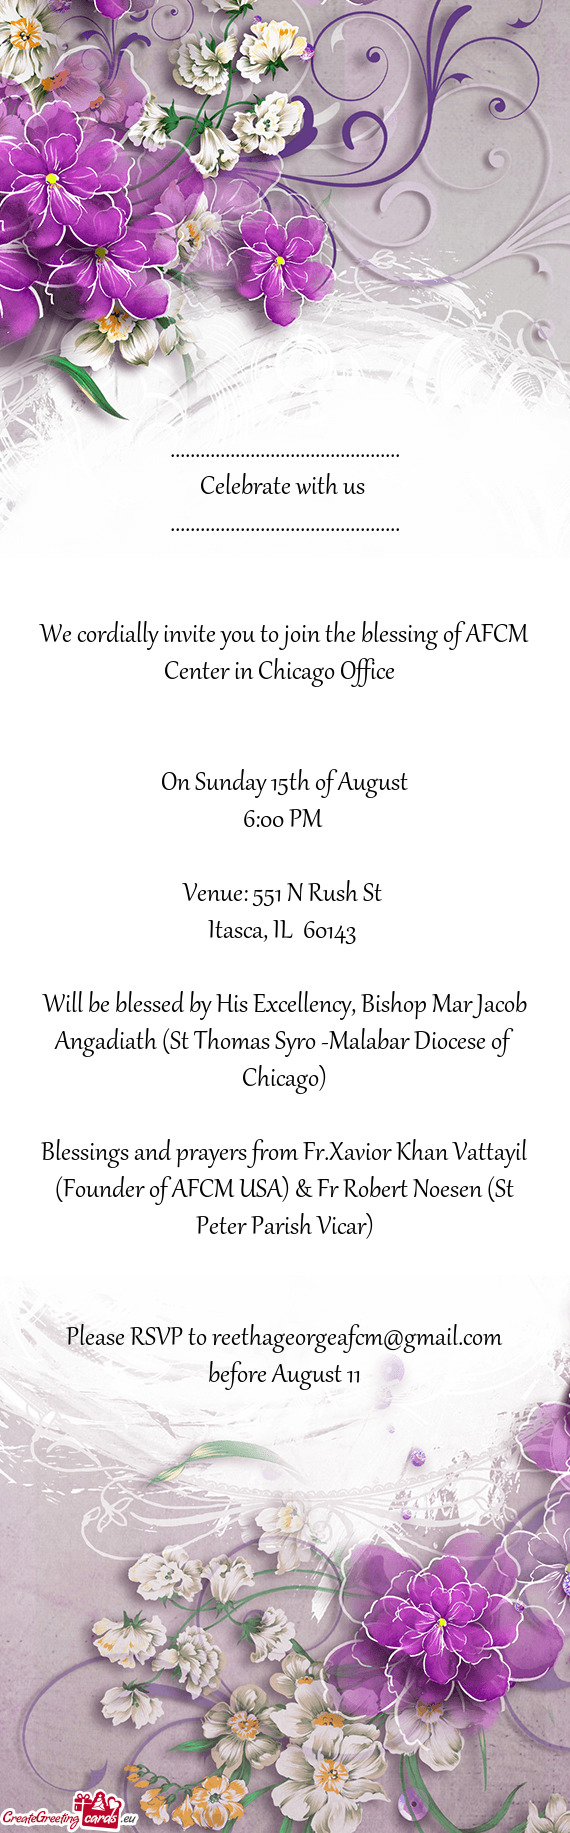 We cordially invite you to join the blessing of AFCM Center in Chicago Office